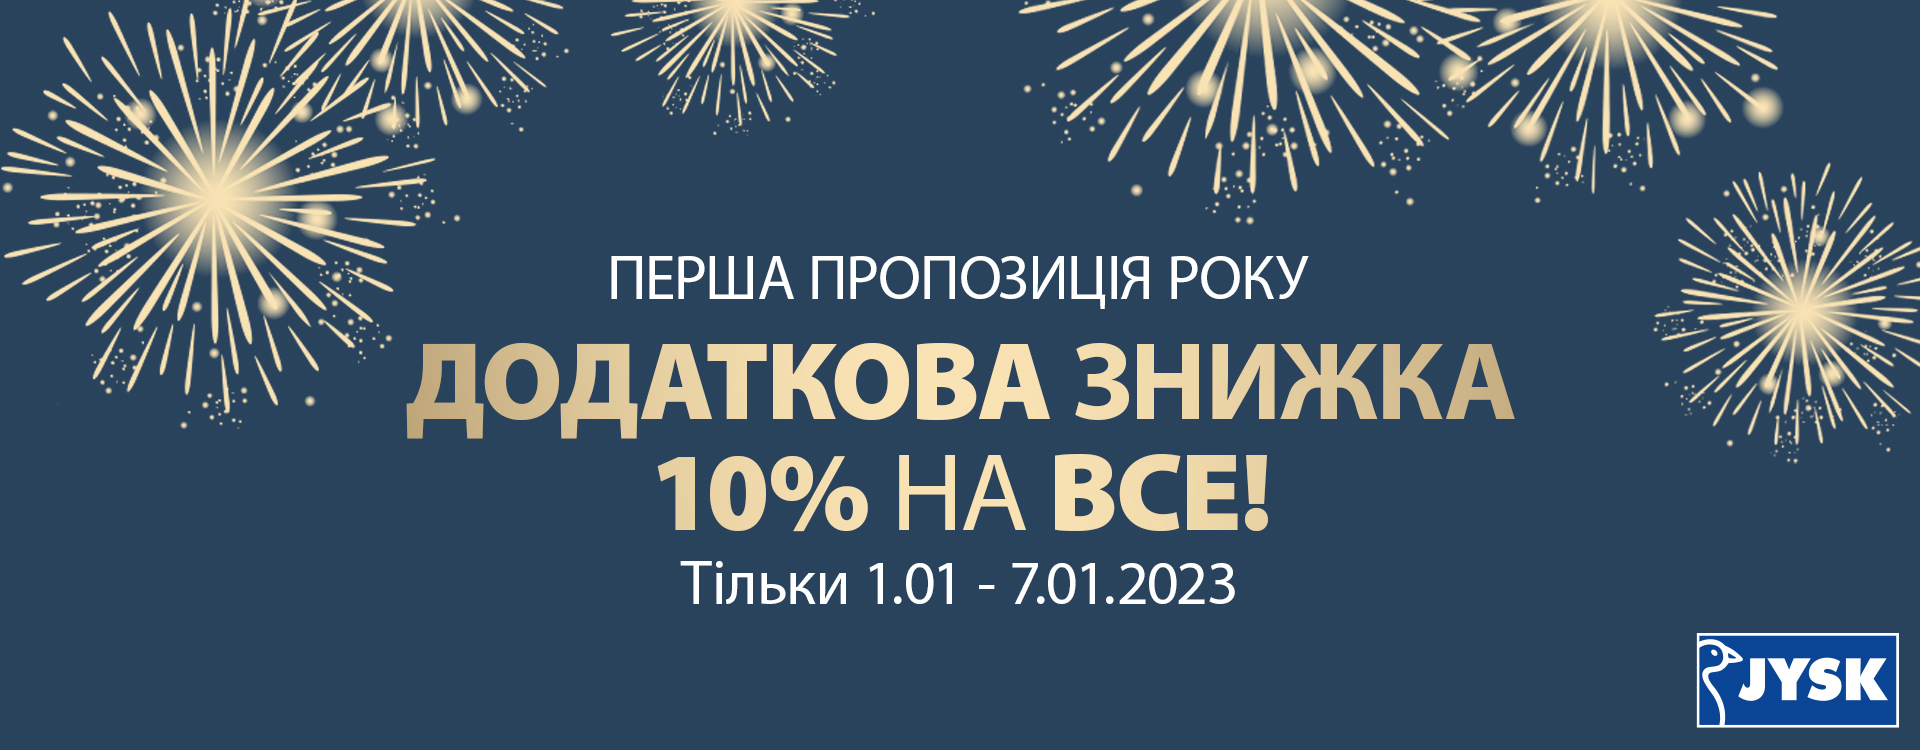 JYSK gives an EXTRA 10% DISCOUNT